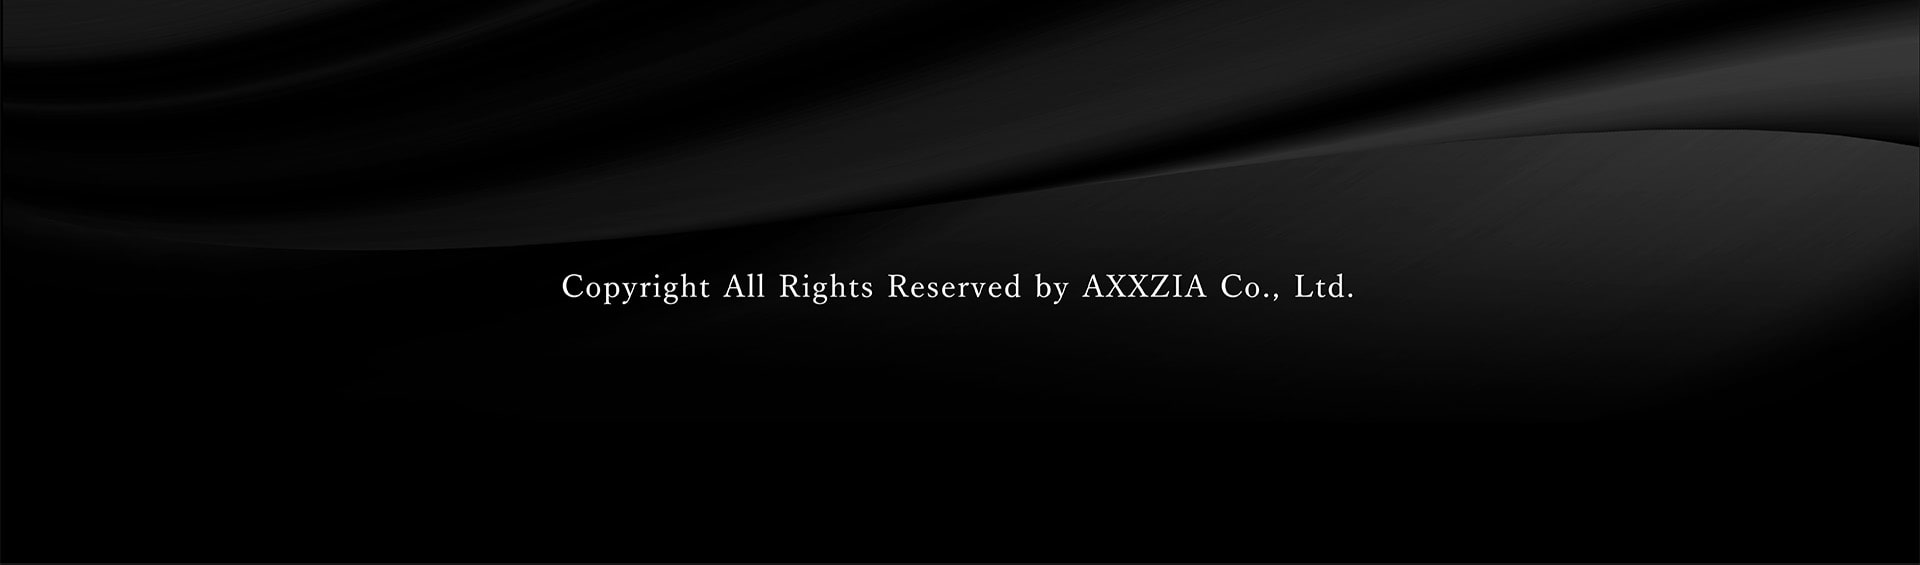 copyright All Rights Reserved by AXXZIA Co., Ltd.